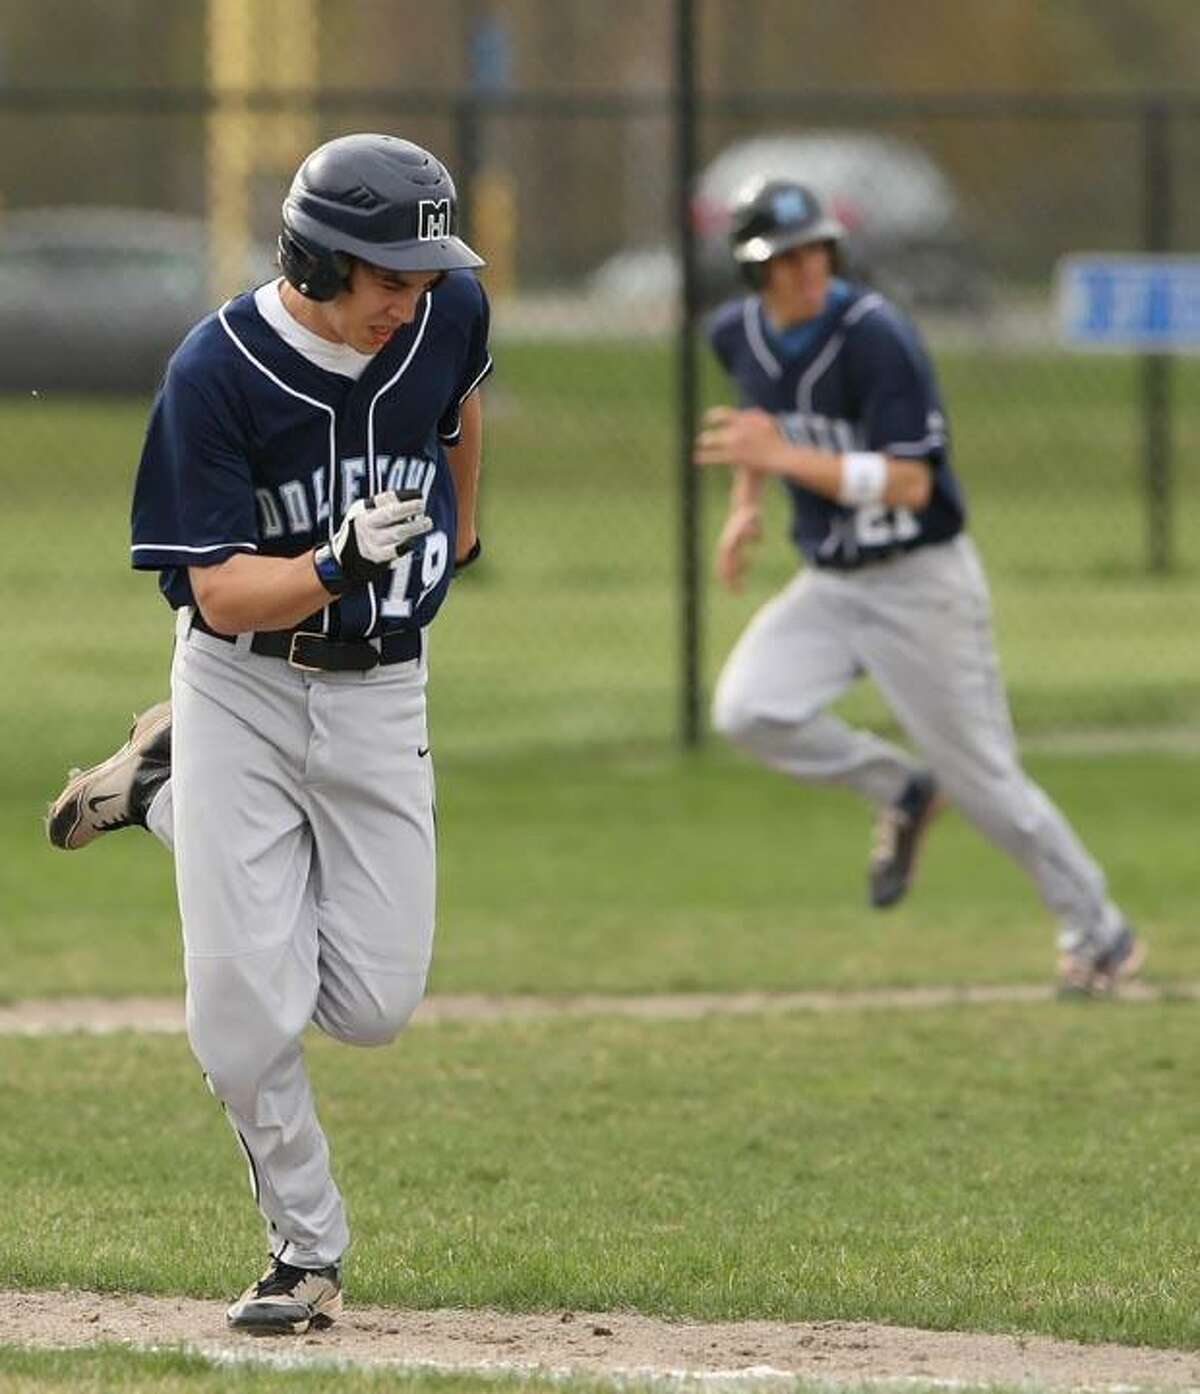 Todd Kalif/Special to The Press Another close miss as Middletown's Pat Michaud races to beat a third out throw at first while Josh Strohm races to the plate on Monday in Middletown baseball's 16-6 loss to Bristol Central.